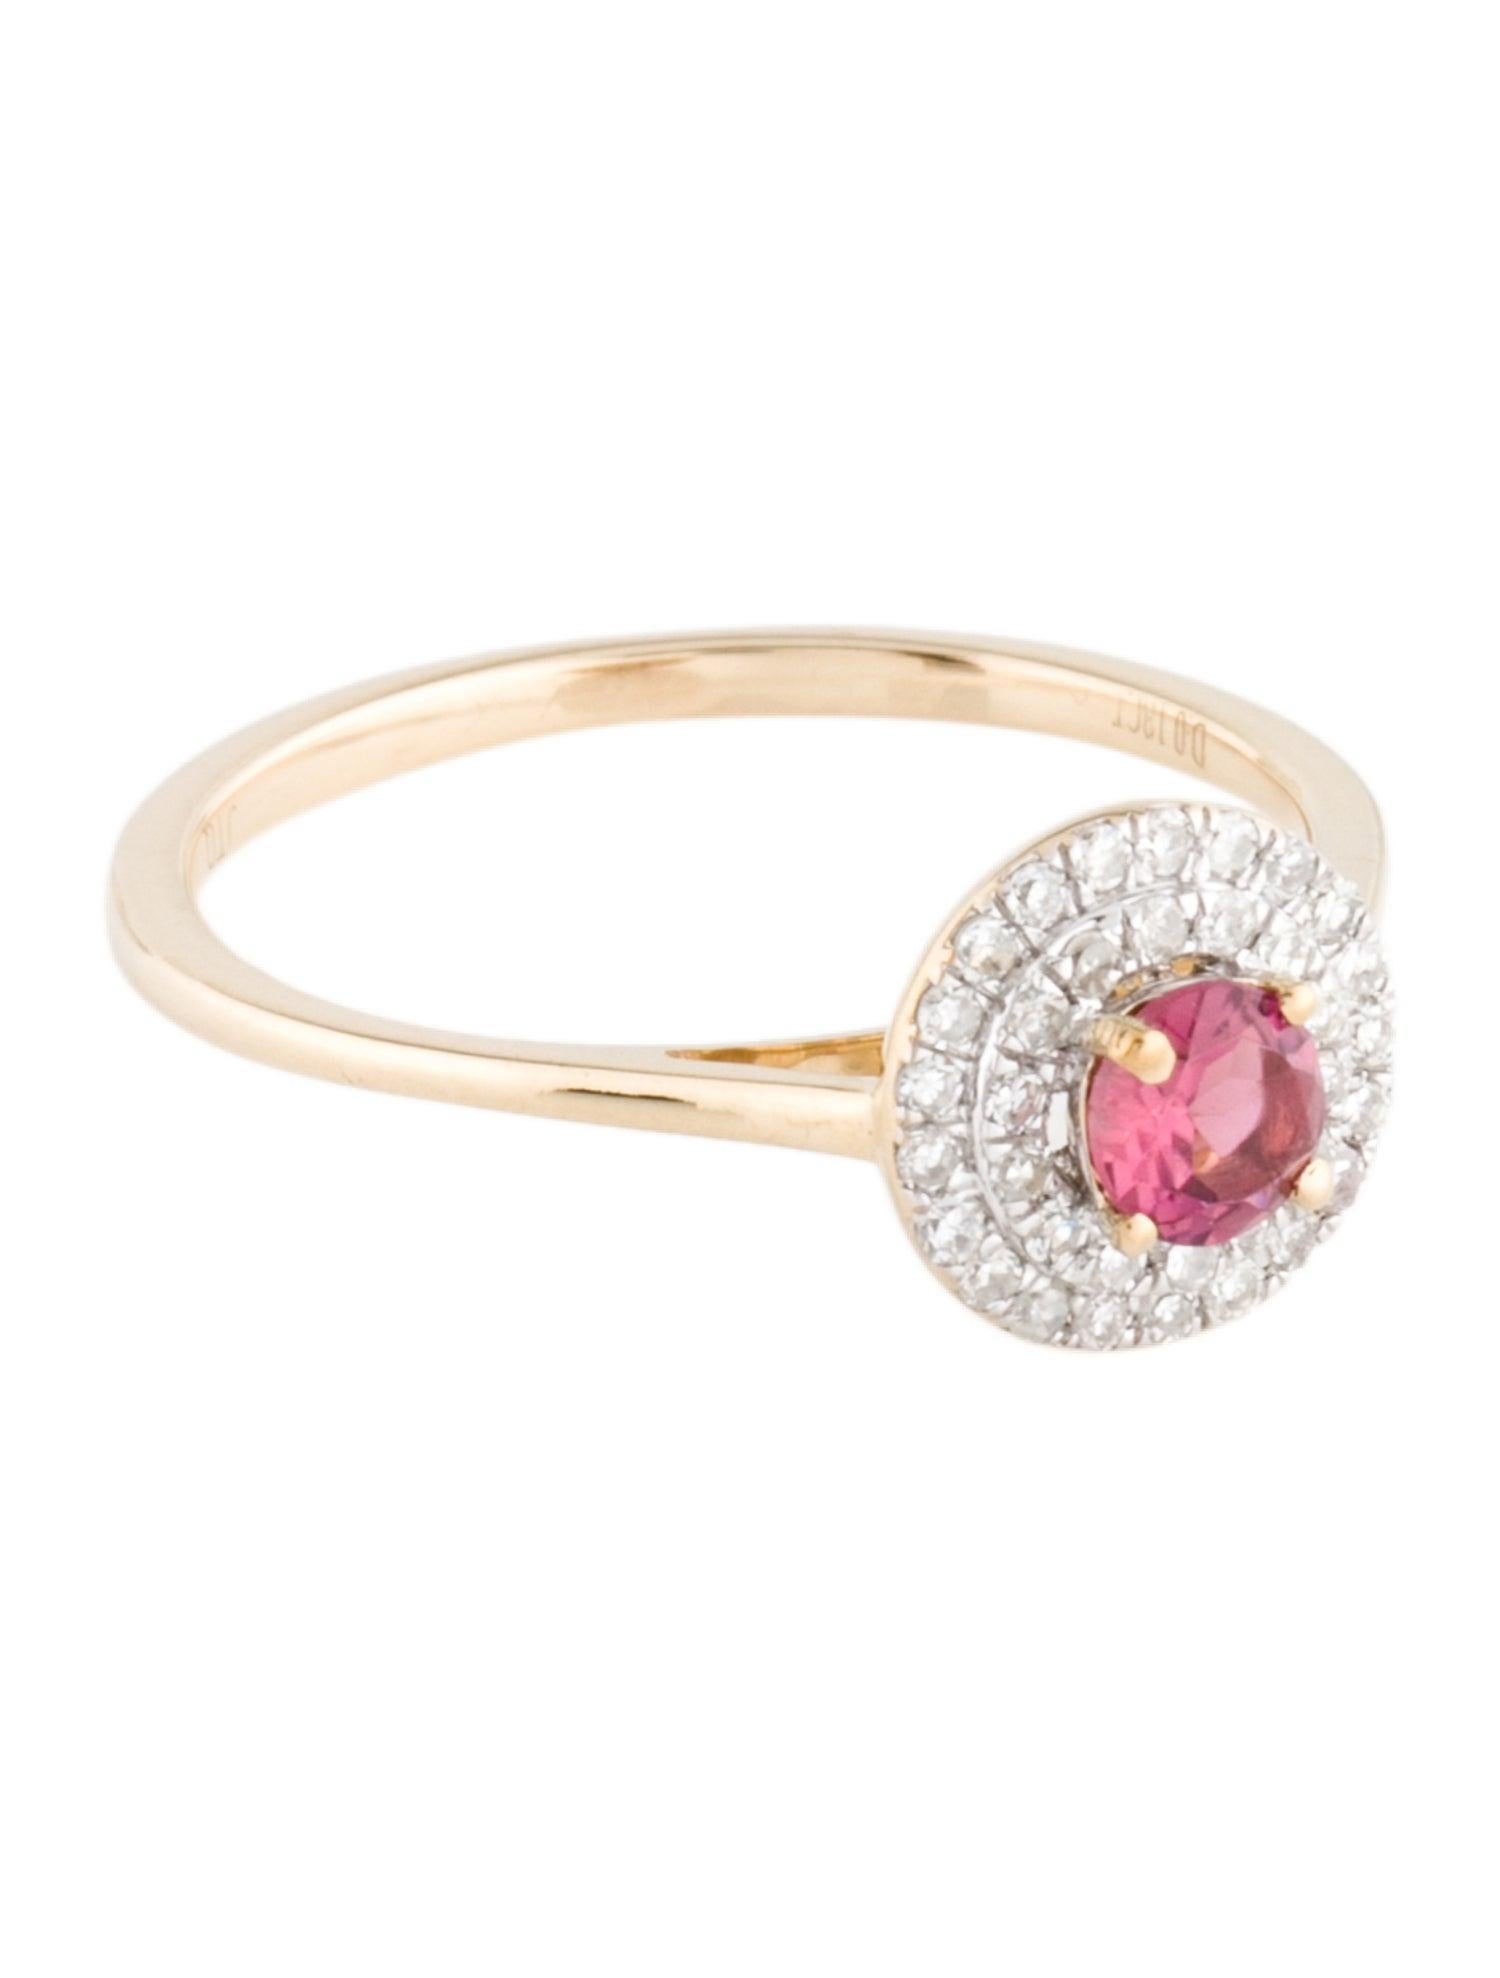 Step into the enchanting world of Jeweltique's Rainbow Gemstone Radiance Collection, where each ring is a vibrant celebration of the kaleidoscopic beauty inherent in Pink Tourmaline and Diamonds. Meticulously crafted with passion and precision,